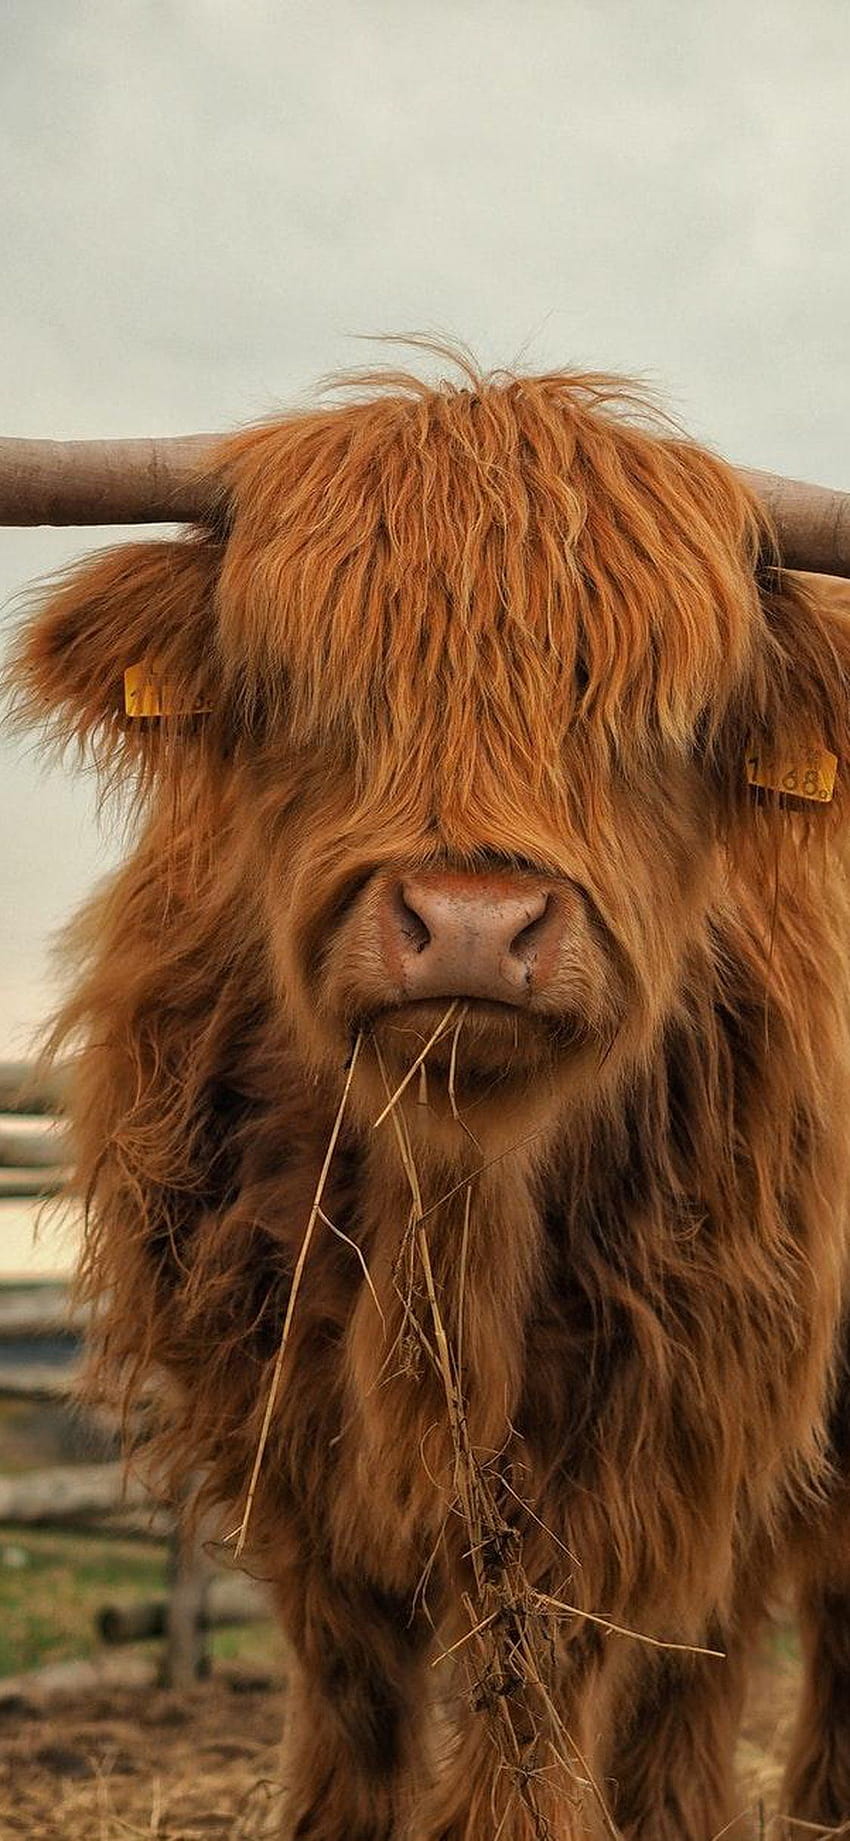 Highland Cow on GreePX, cow winter HD phone wallpaper